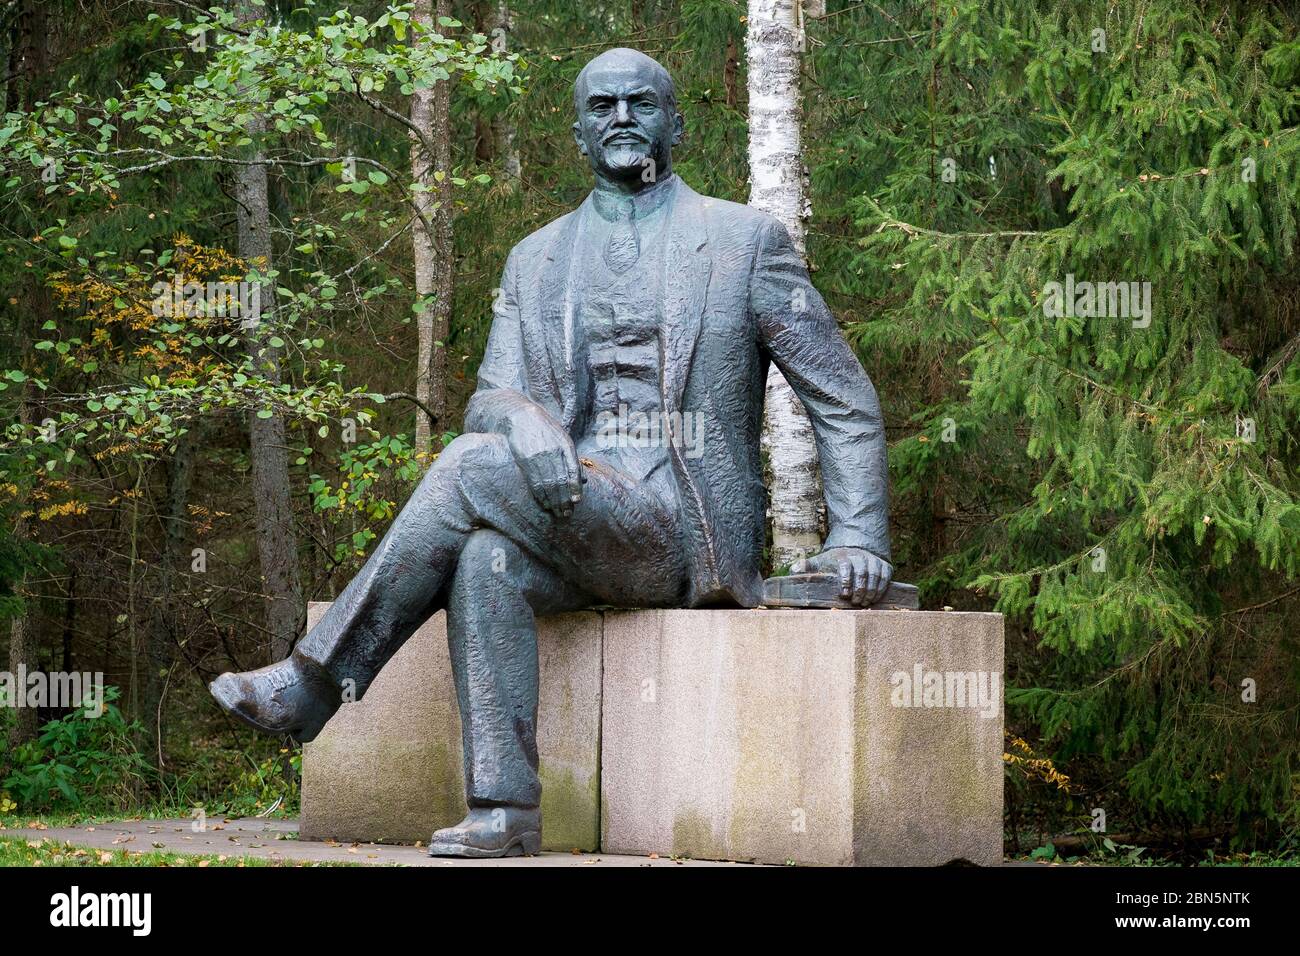 A large, bronze statue of a sitting Lenin with a book. At Gruto Parkas near Druskininkai, Lithuania. Stock Photo